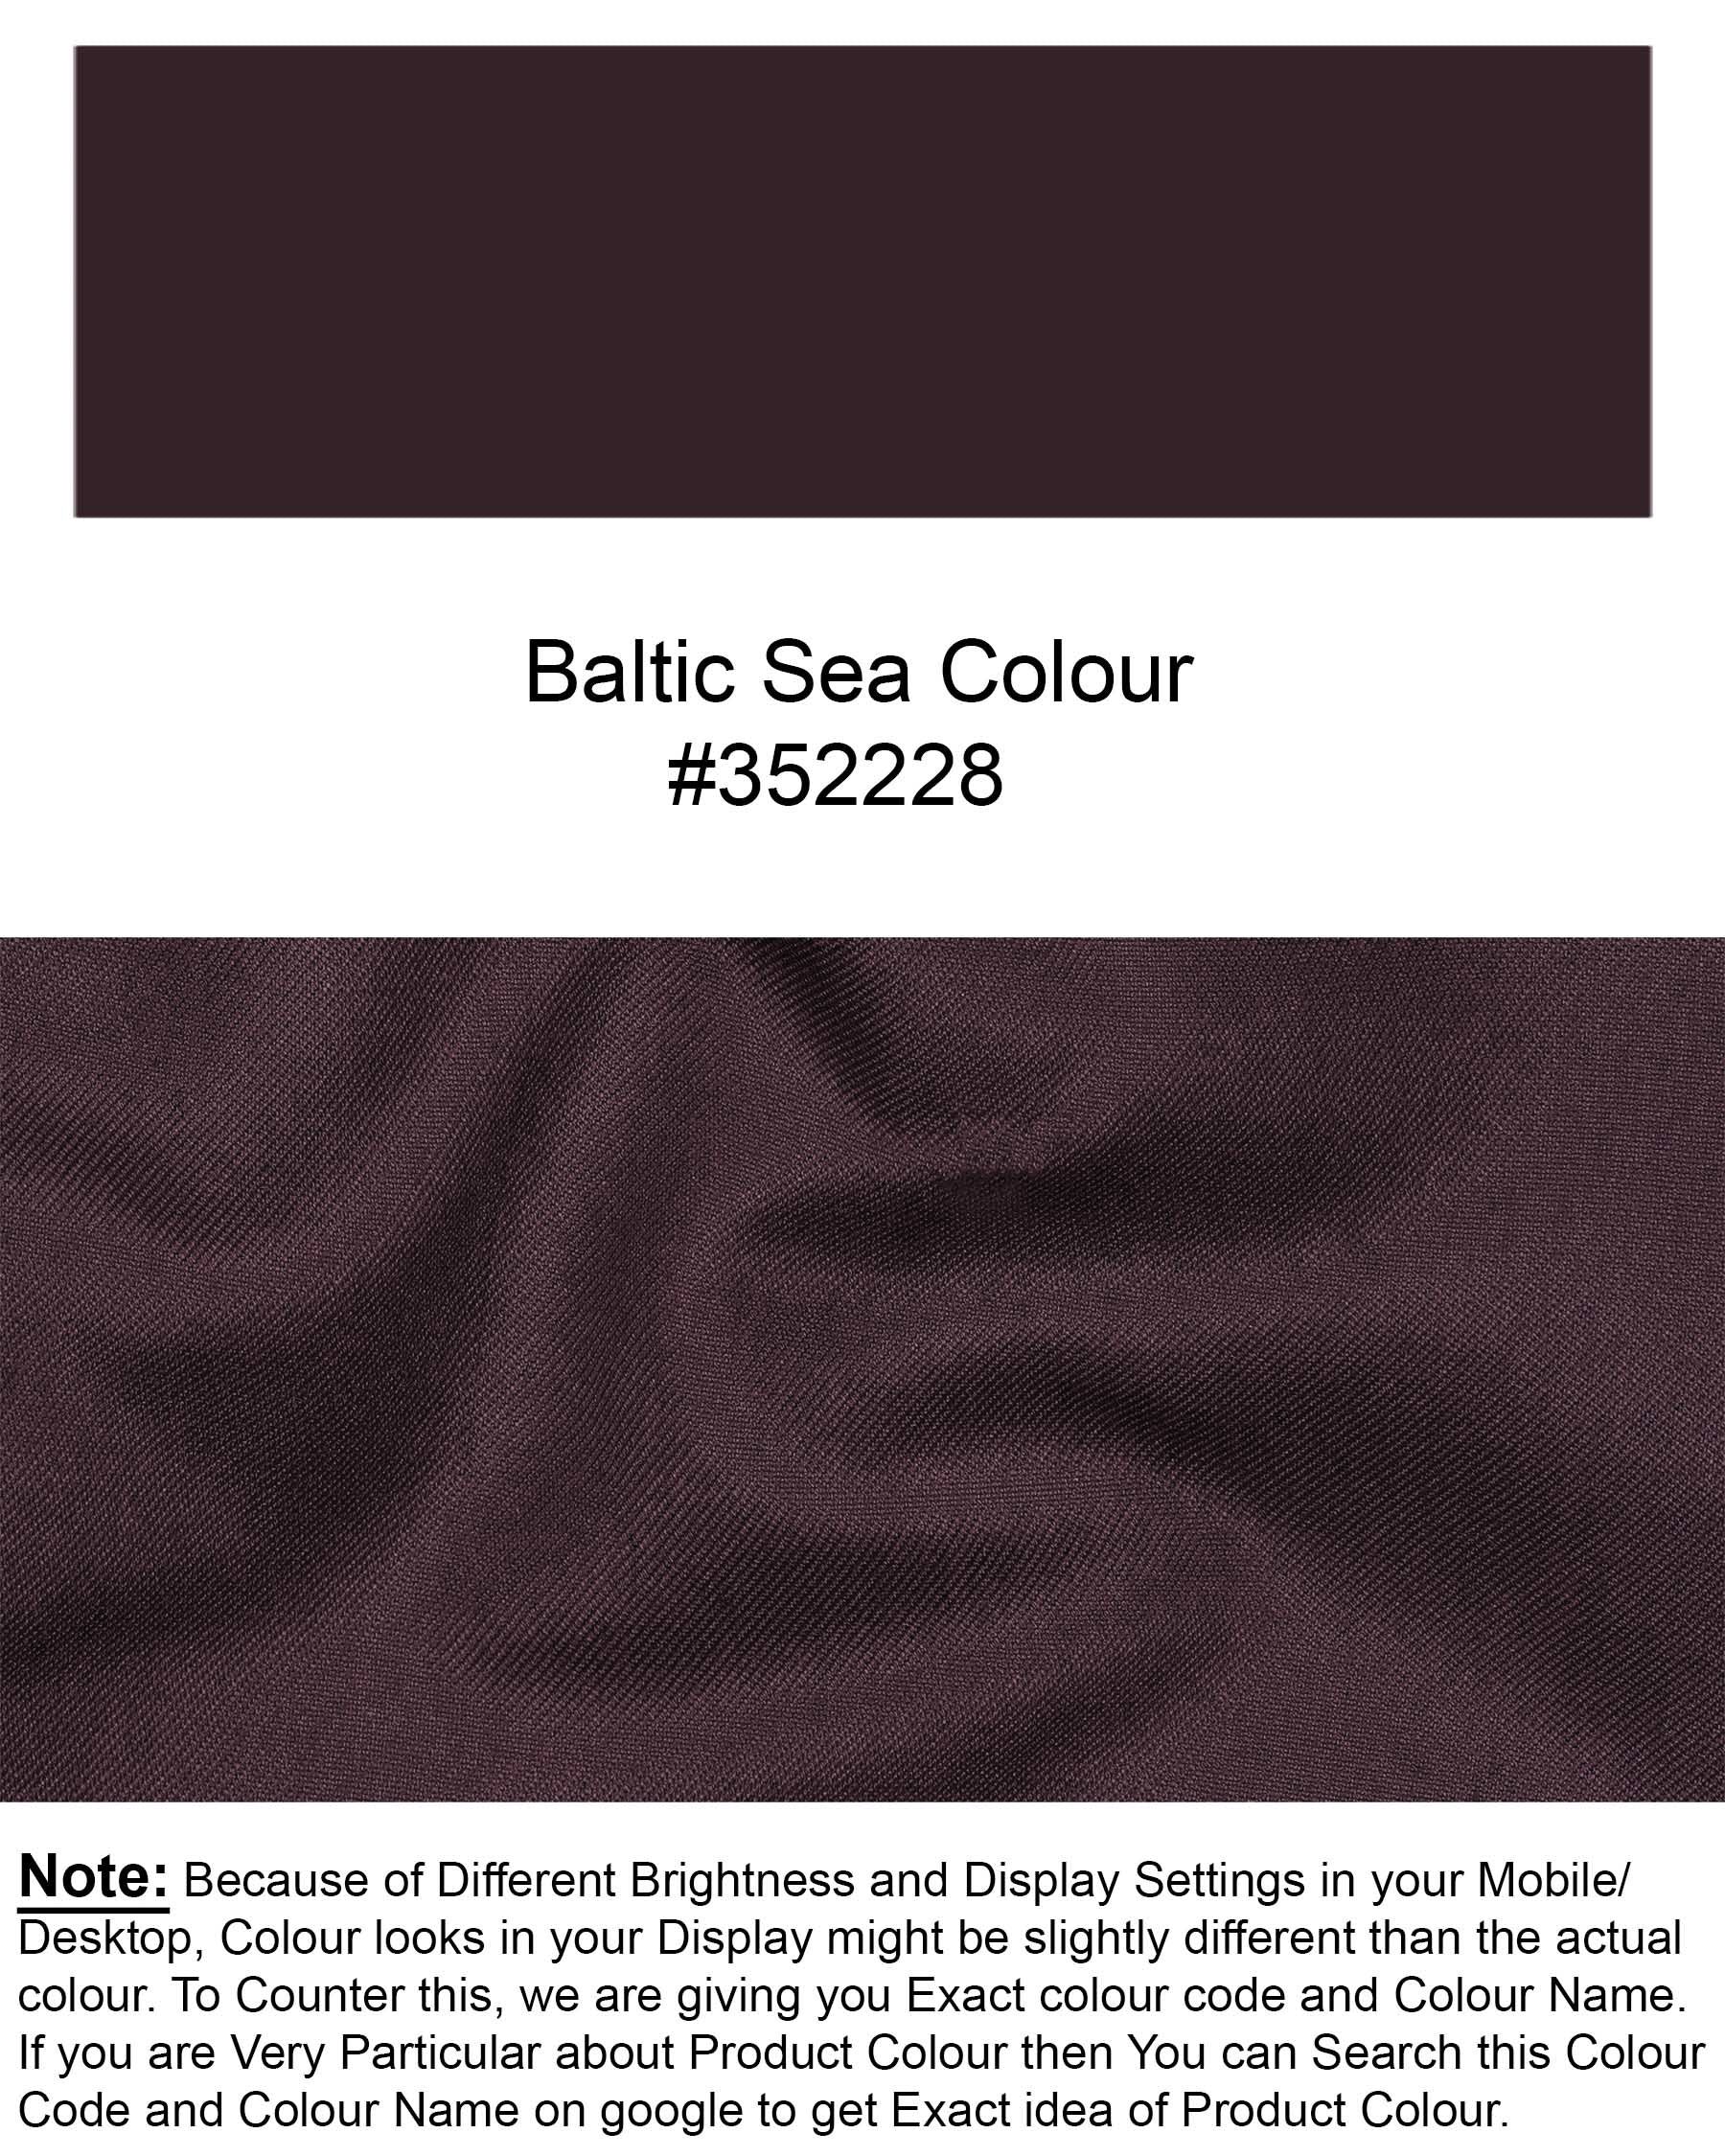 Baltic Sea Solid Pant T1914-28, T1914-30, T1914-32, T1914-34, T1914-36, T1914-38, T1914-40, T1914-42, T1914-44